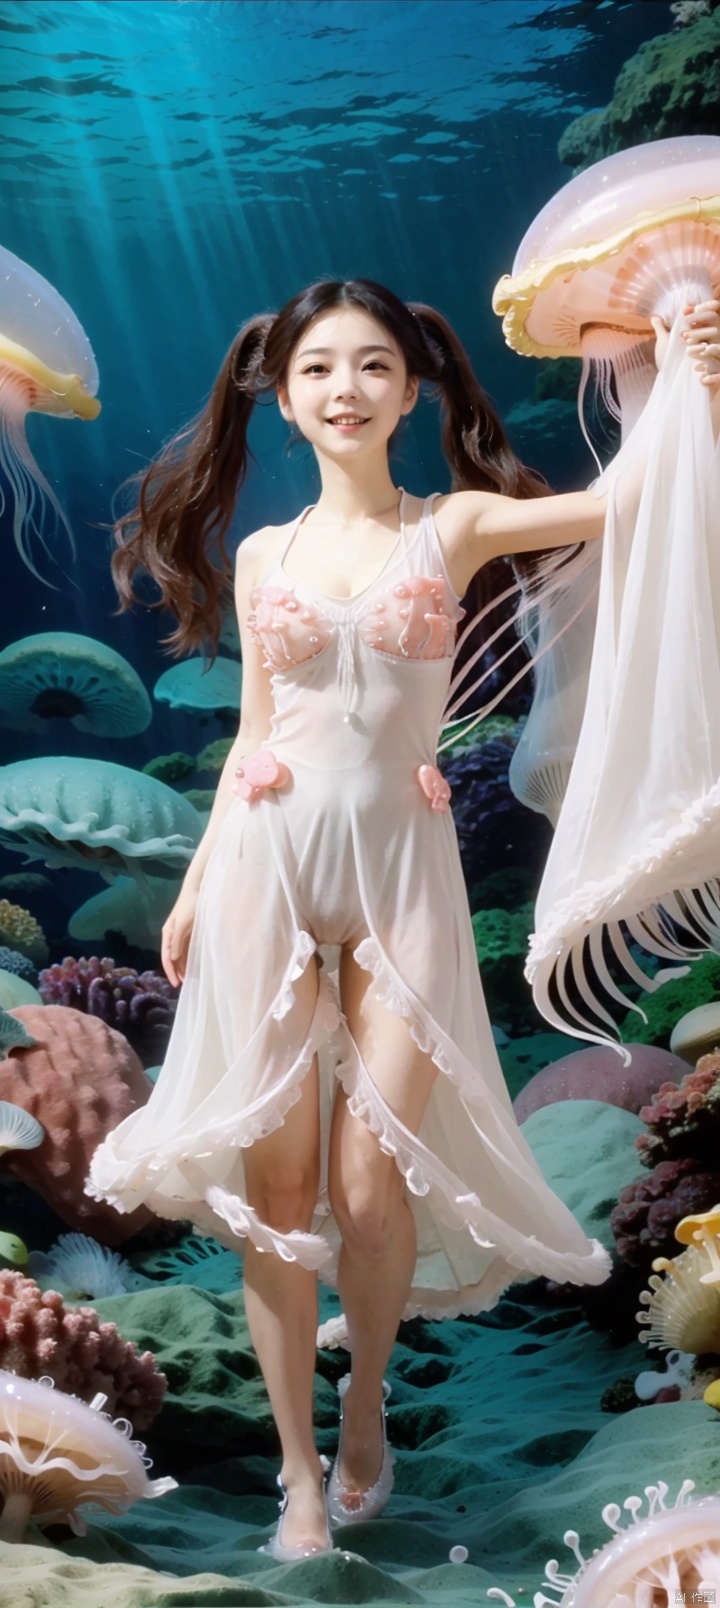   (***** full body:1.5),(very big jellyfish:1.5),(under sea:1.5),(dance:1.3),(seabed:1.5),laugh,smile,happy,exciting,very transparent gauze garment,very transparent clothing,twintails,hair buns,straight hair,long hair,black hair,Narrow shoulders,extremely detailed eyes and face, beautiful detailed eyes,big eyes, jellyfish,coral,octopus,shell,shells,jellyfish,coral,octopus,shell,shells,very long hair,